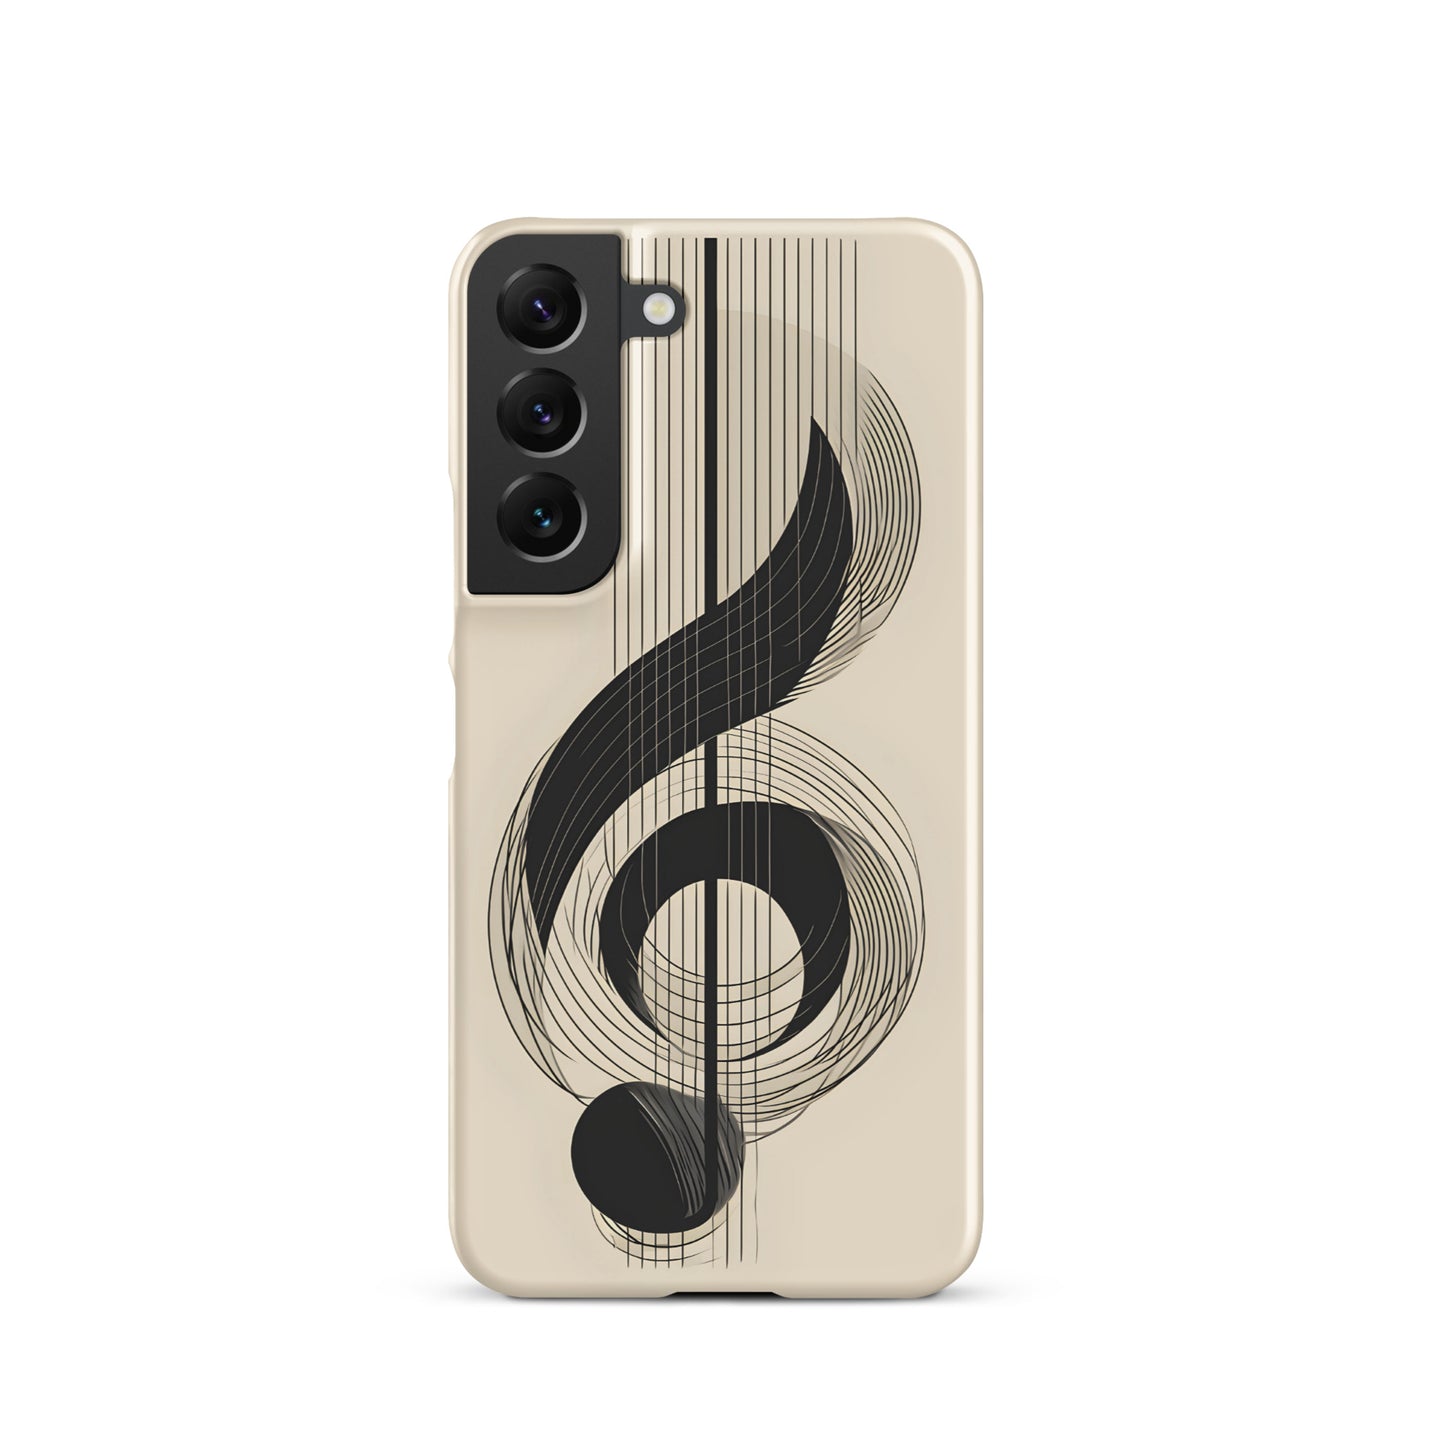 Snap case for Samsung® S10 - S24 Ultra